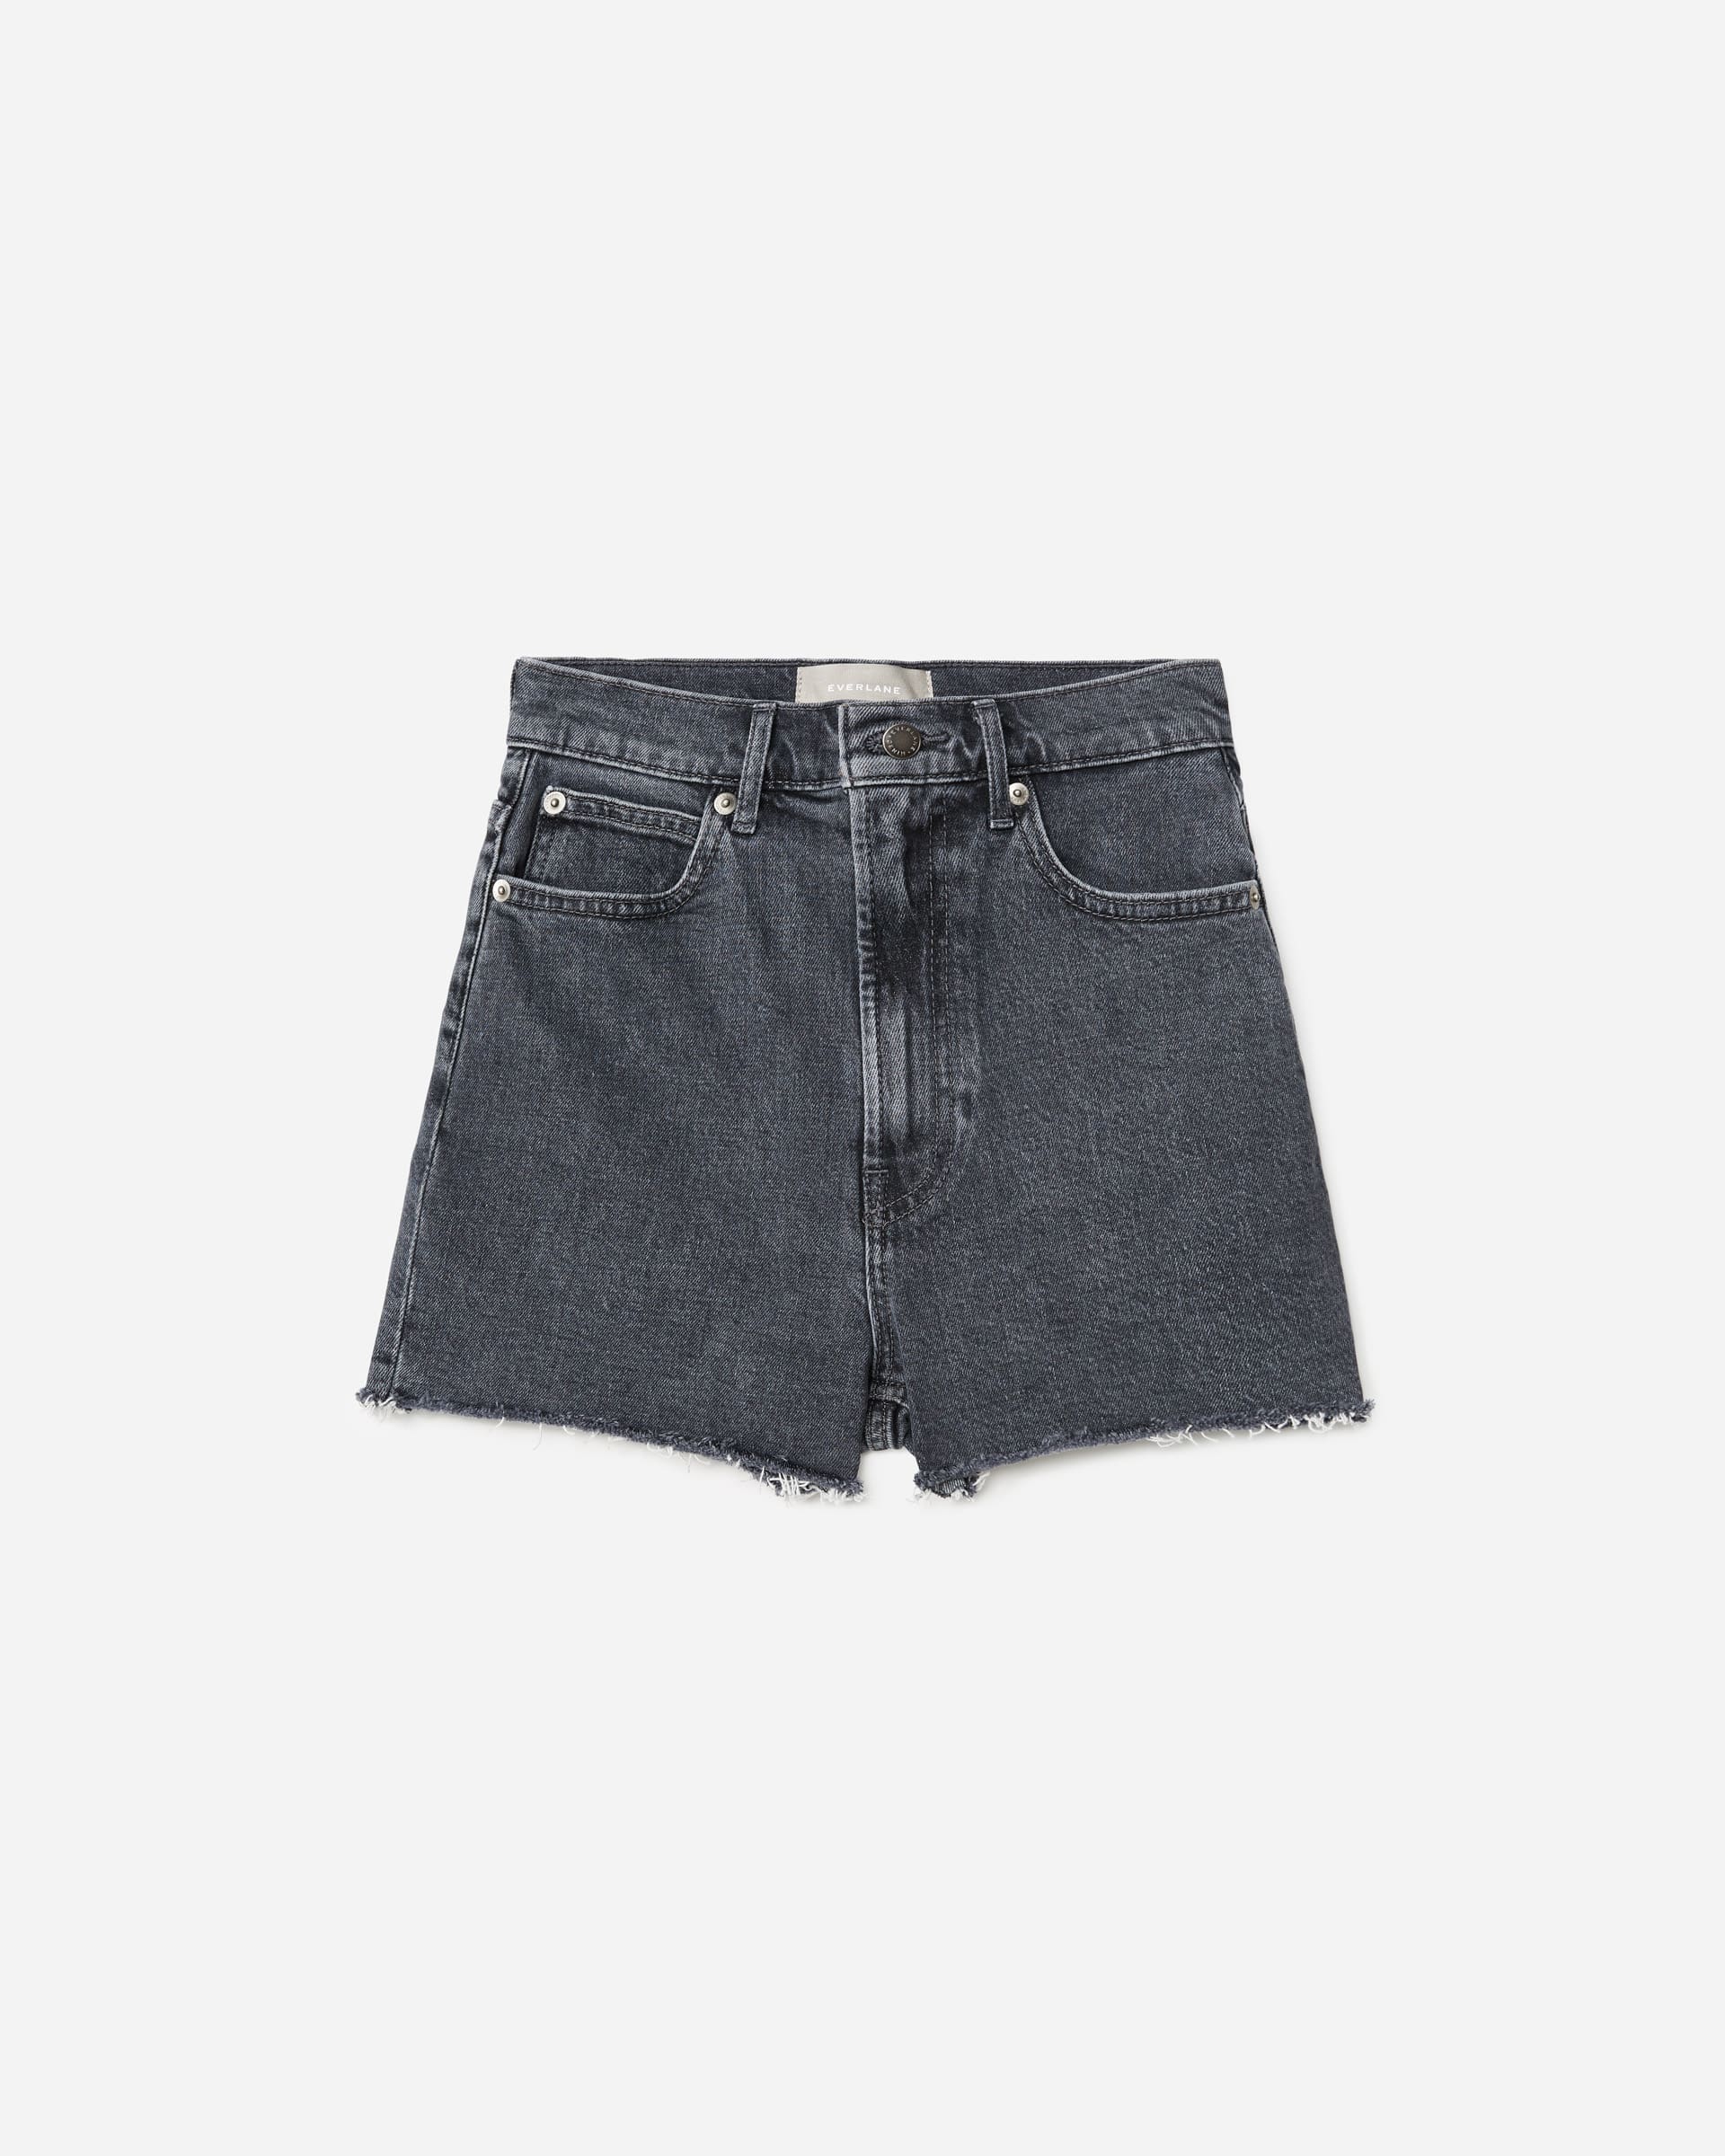 The Way-High Jean Short Washed Charcoal – Everlane